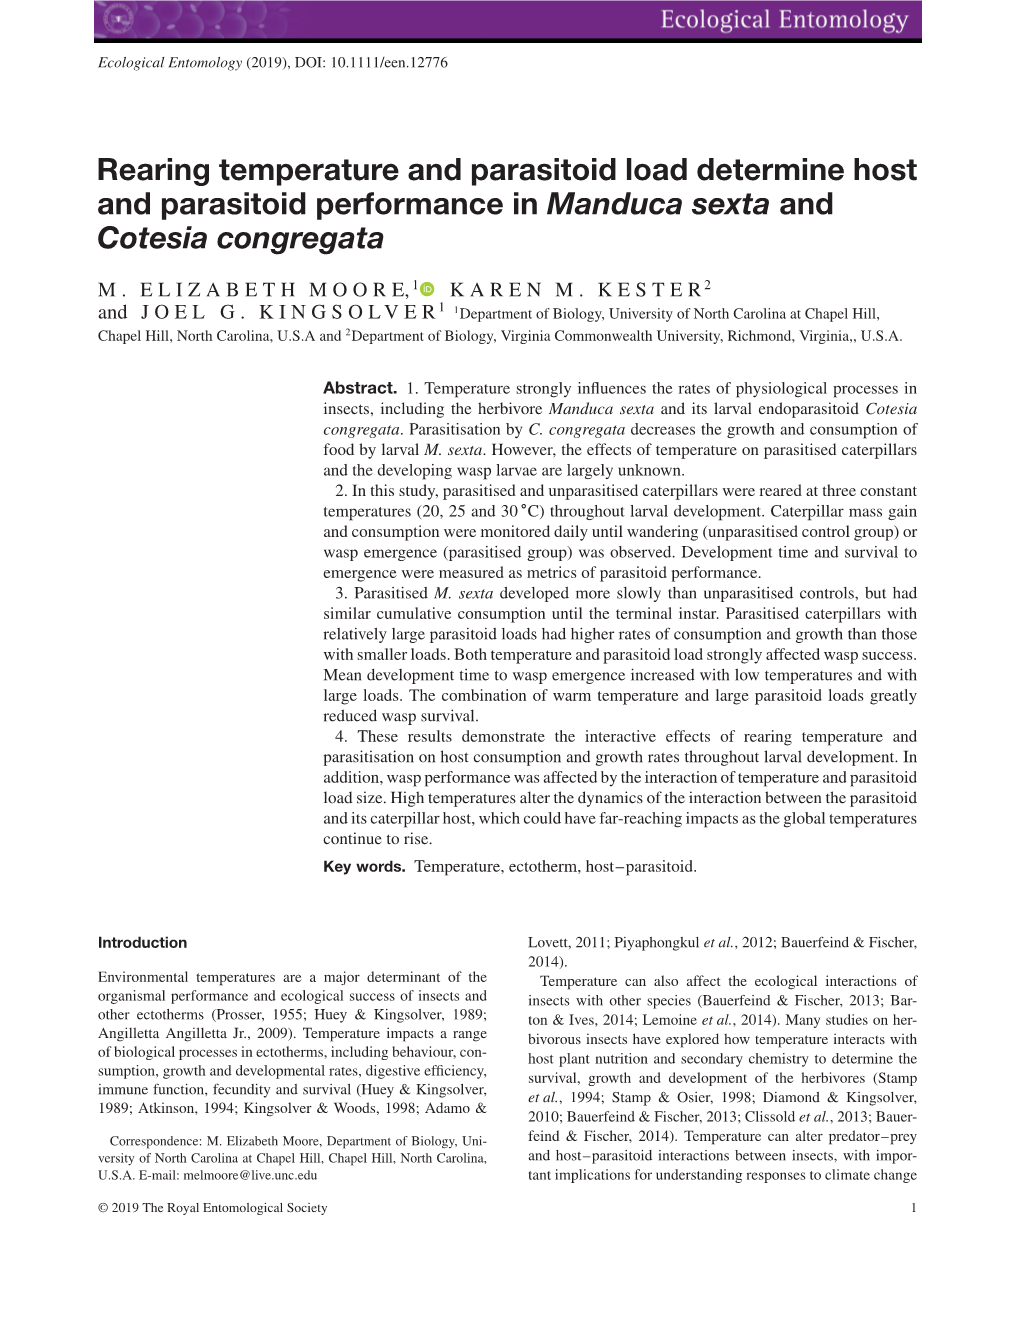 Rearing Temperature and Parasitoid Load Determine Host and Parasitoid Performance in Manduca Sexta and Cotesia Congregata